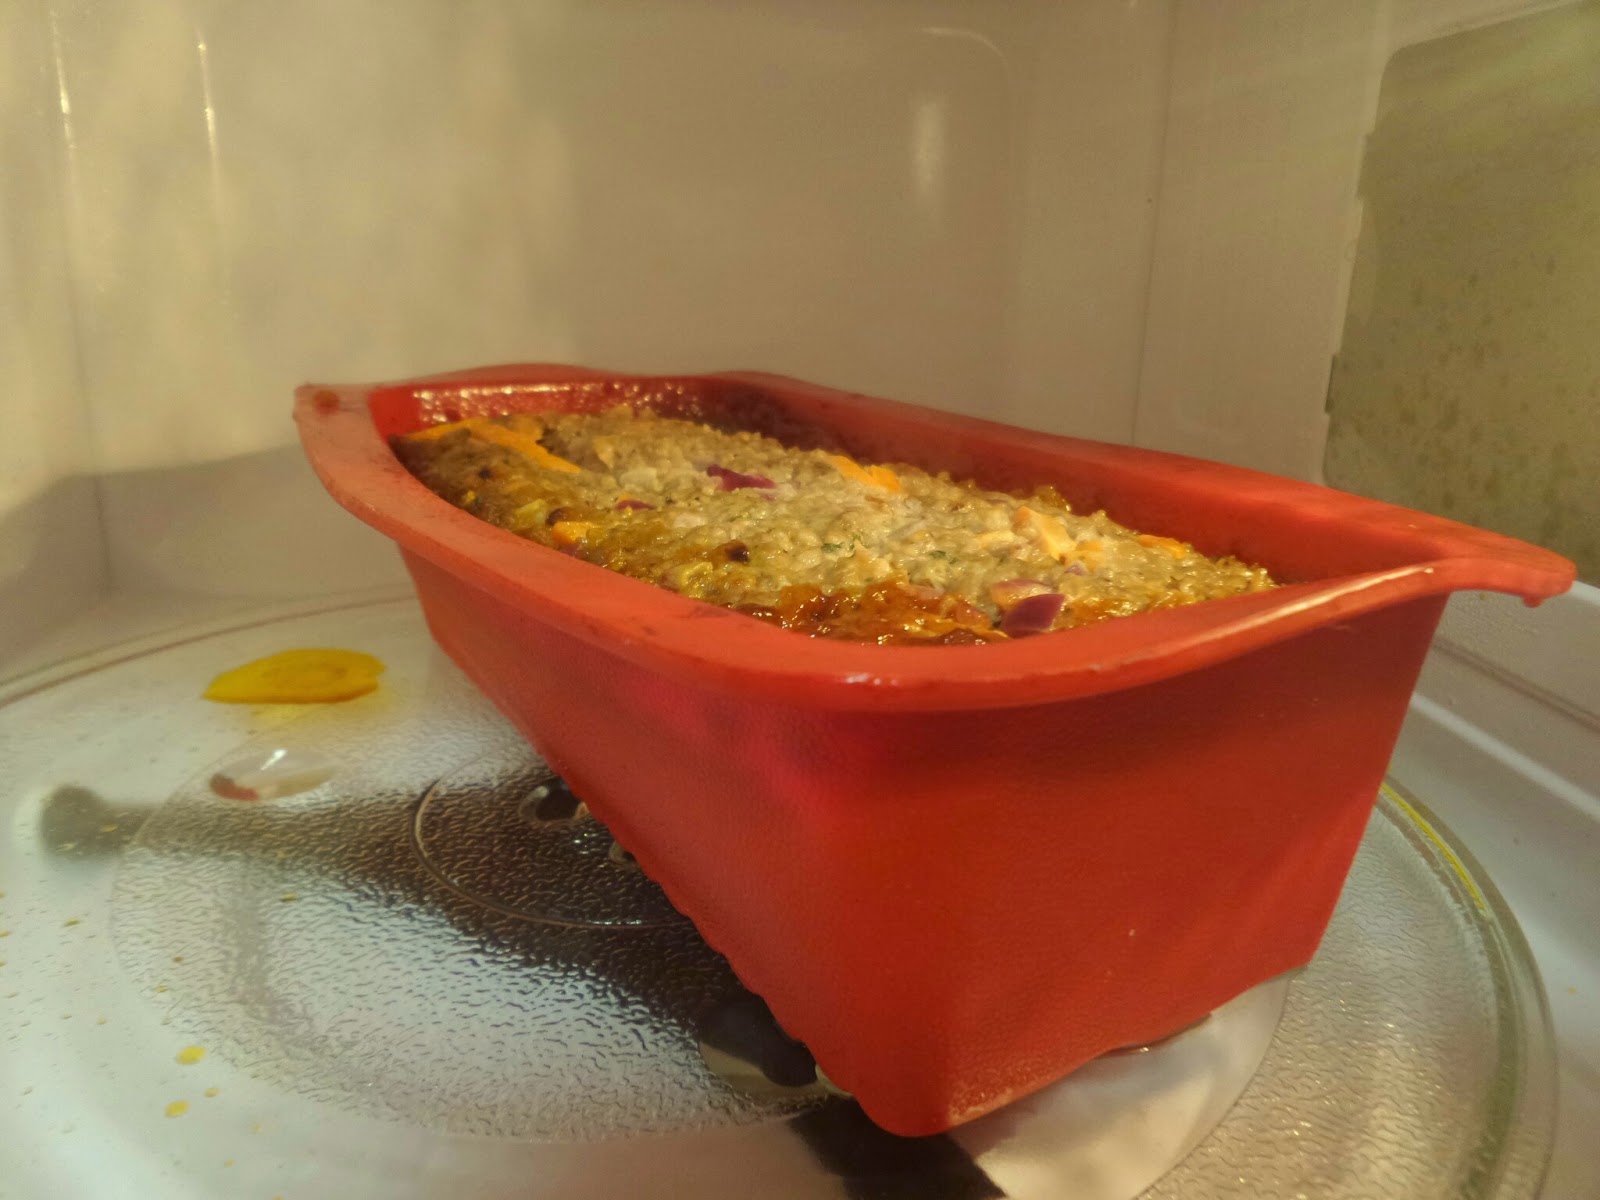 Microwave Meatloaf after being cooked in the Microwave